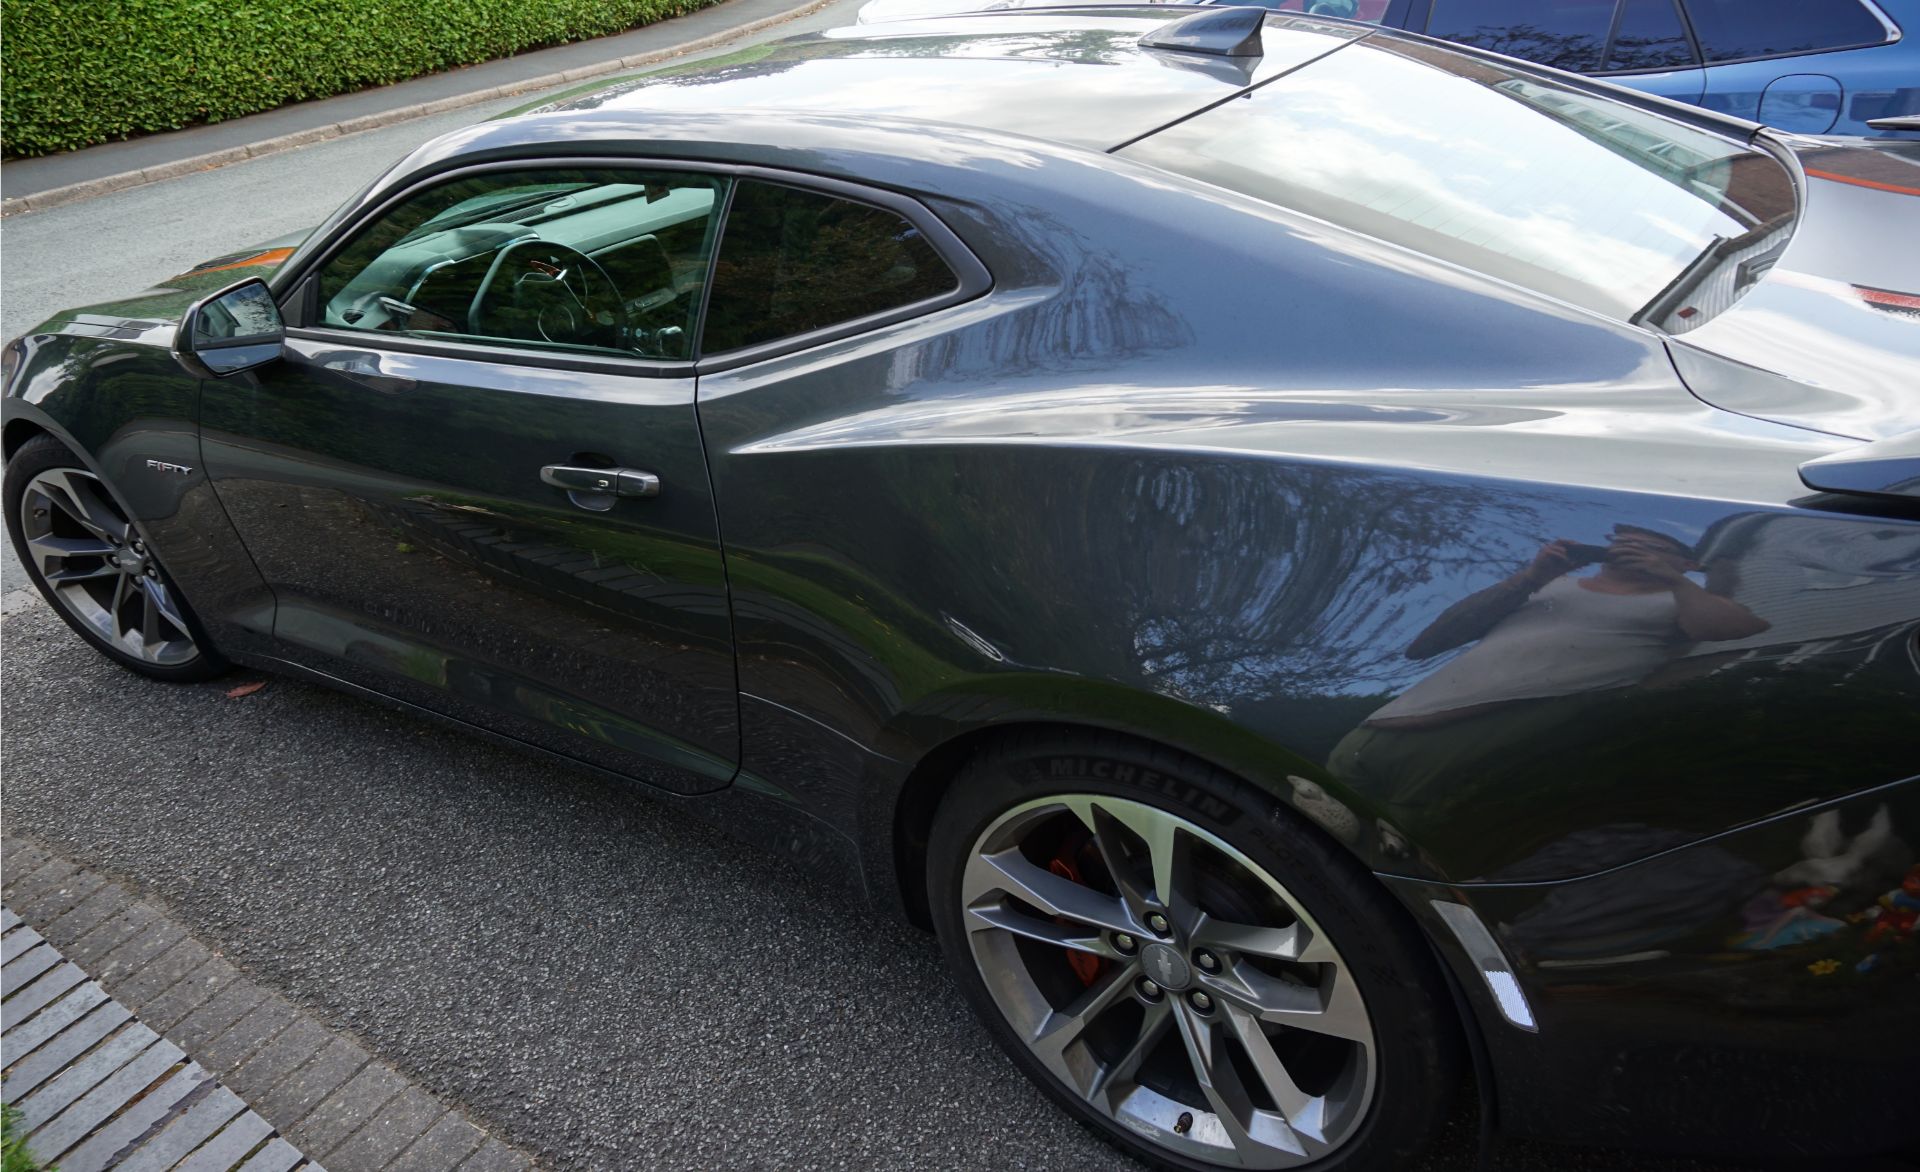 2017/17 REG CHEVROLET CAMARO V8 AUTOMATIC GREY COUPE 50th ANNIVERSARY EDITION, LHD, LOW MILEAGE - Image 4 of 14